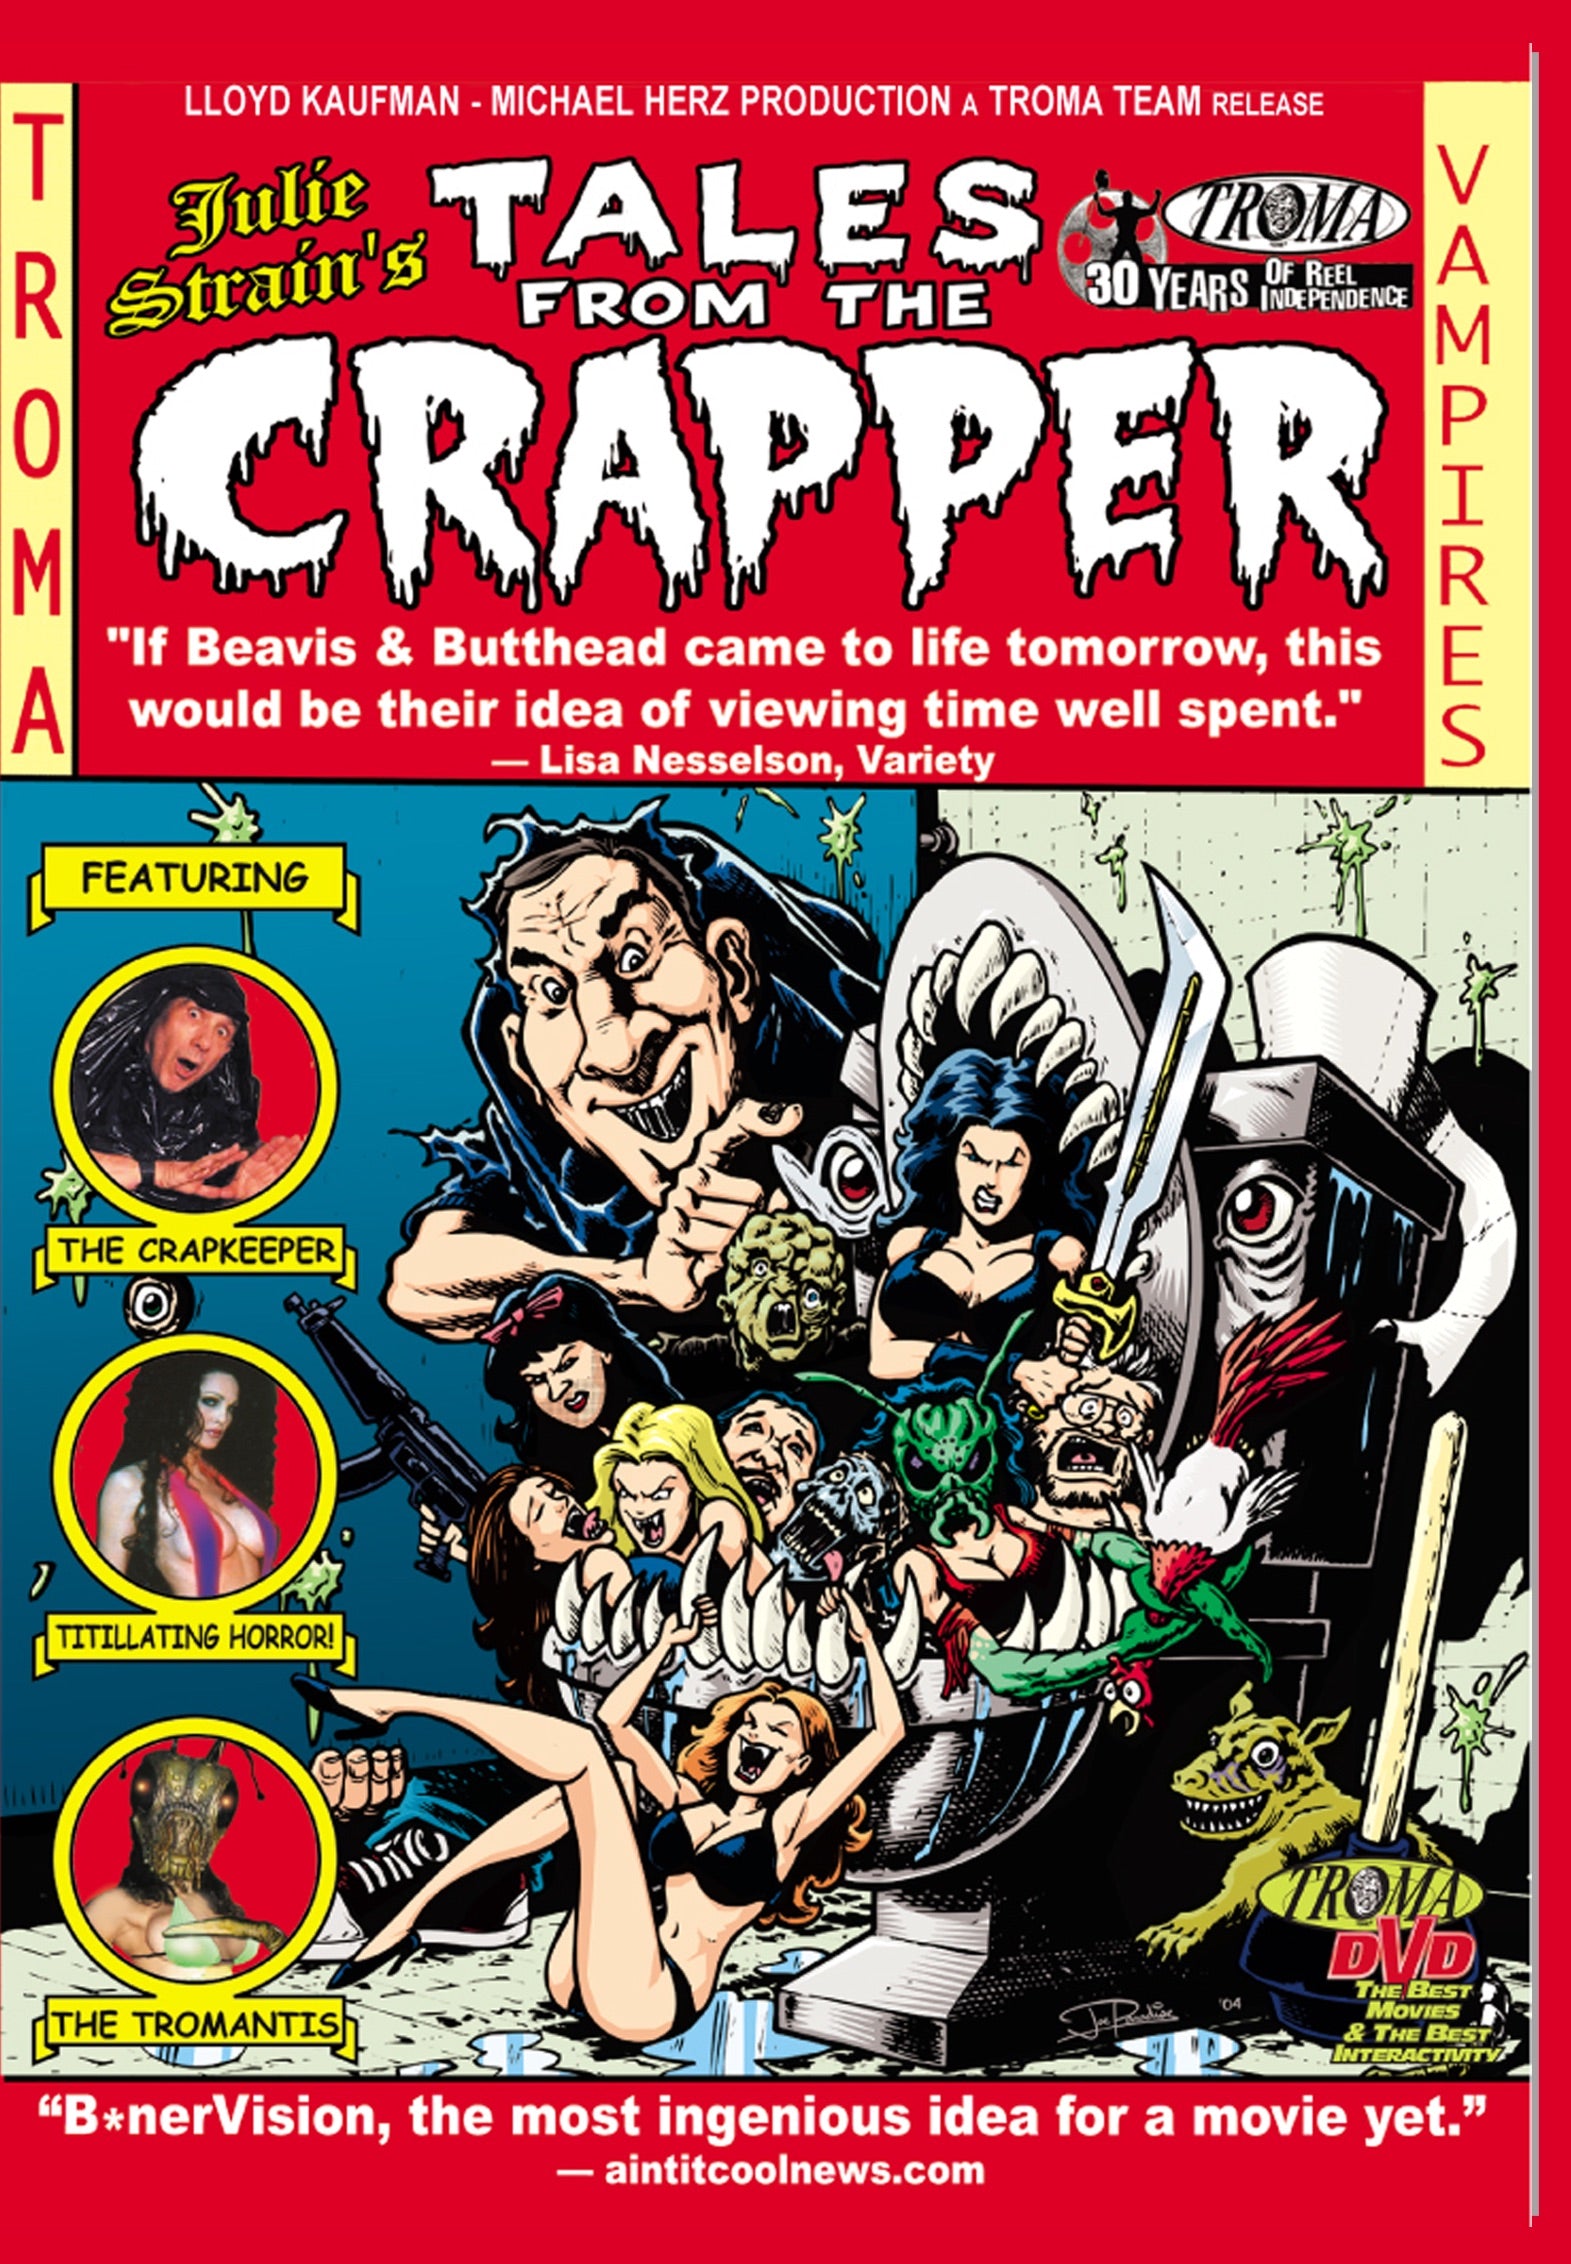 TALES FROM THE CRAPPER DVD